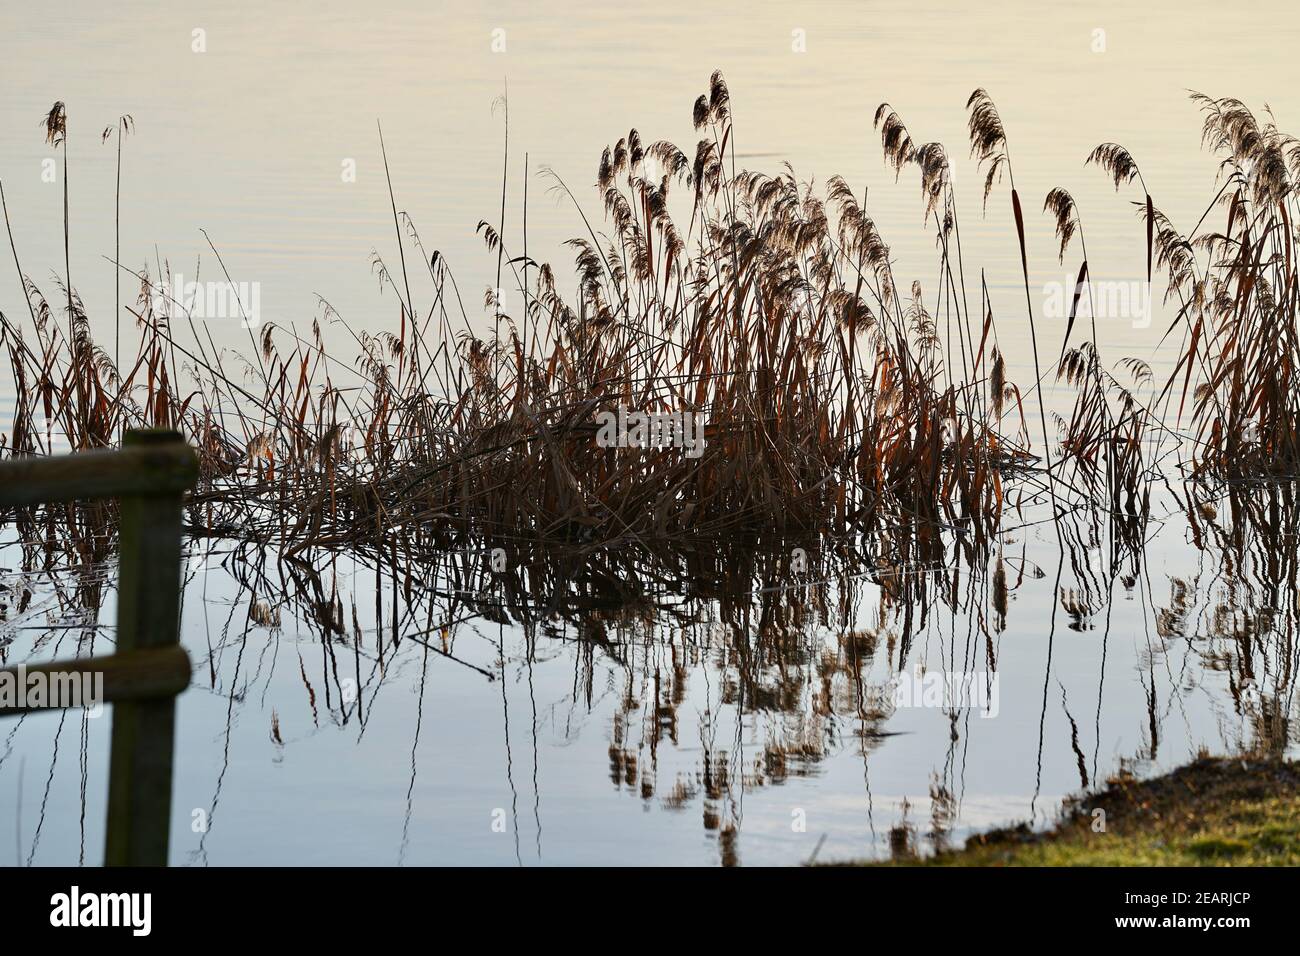 Reed with lake Greifensee, Maur, Switzerland, in the background Stock Photo  - Alamy